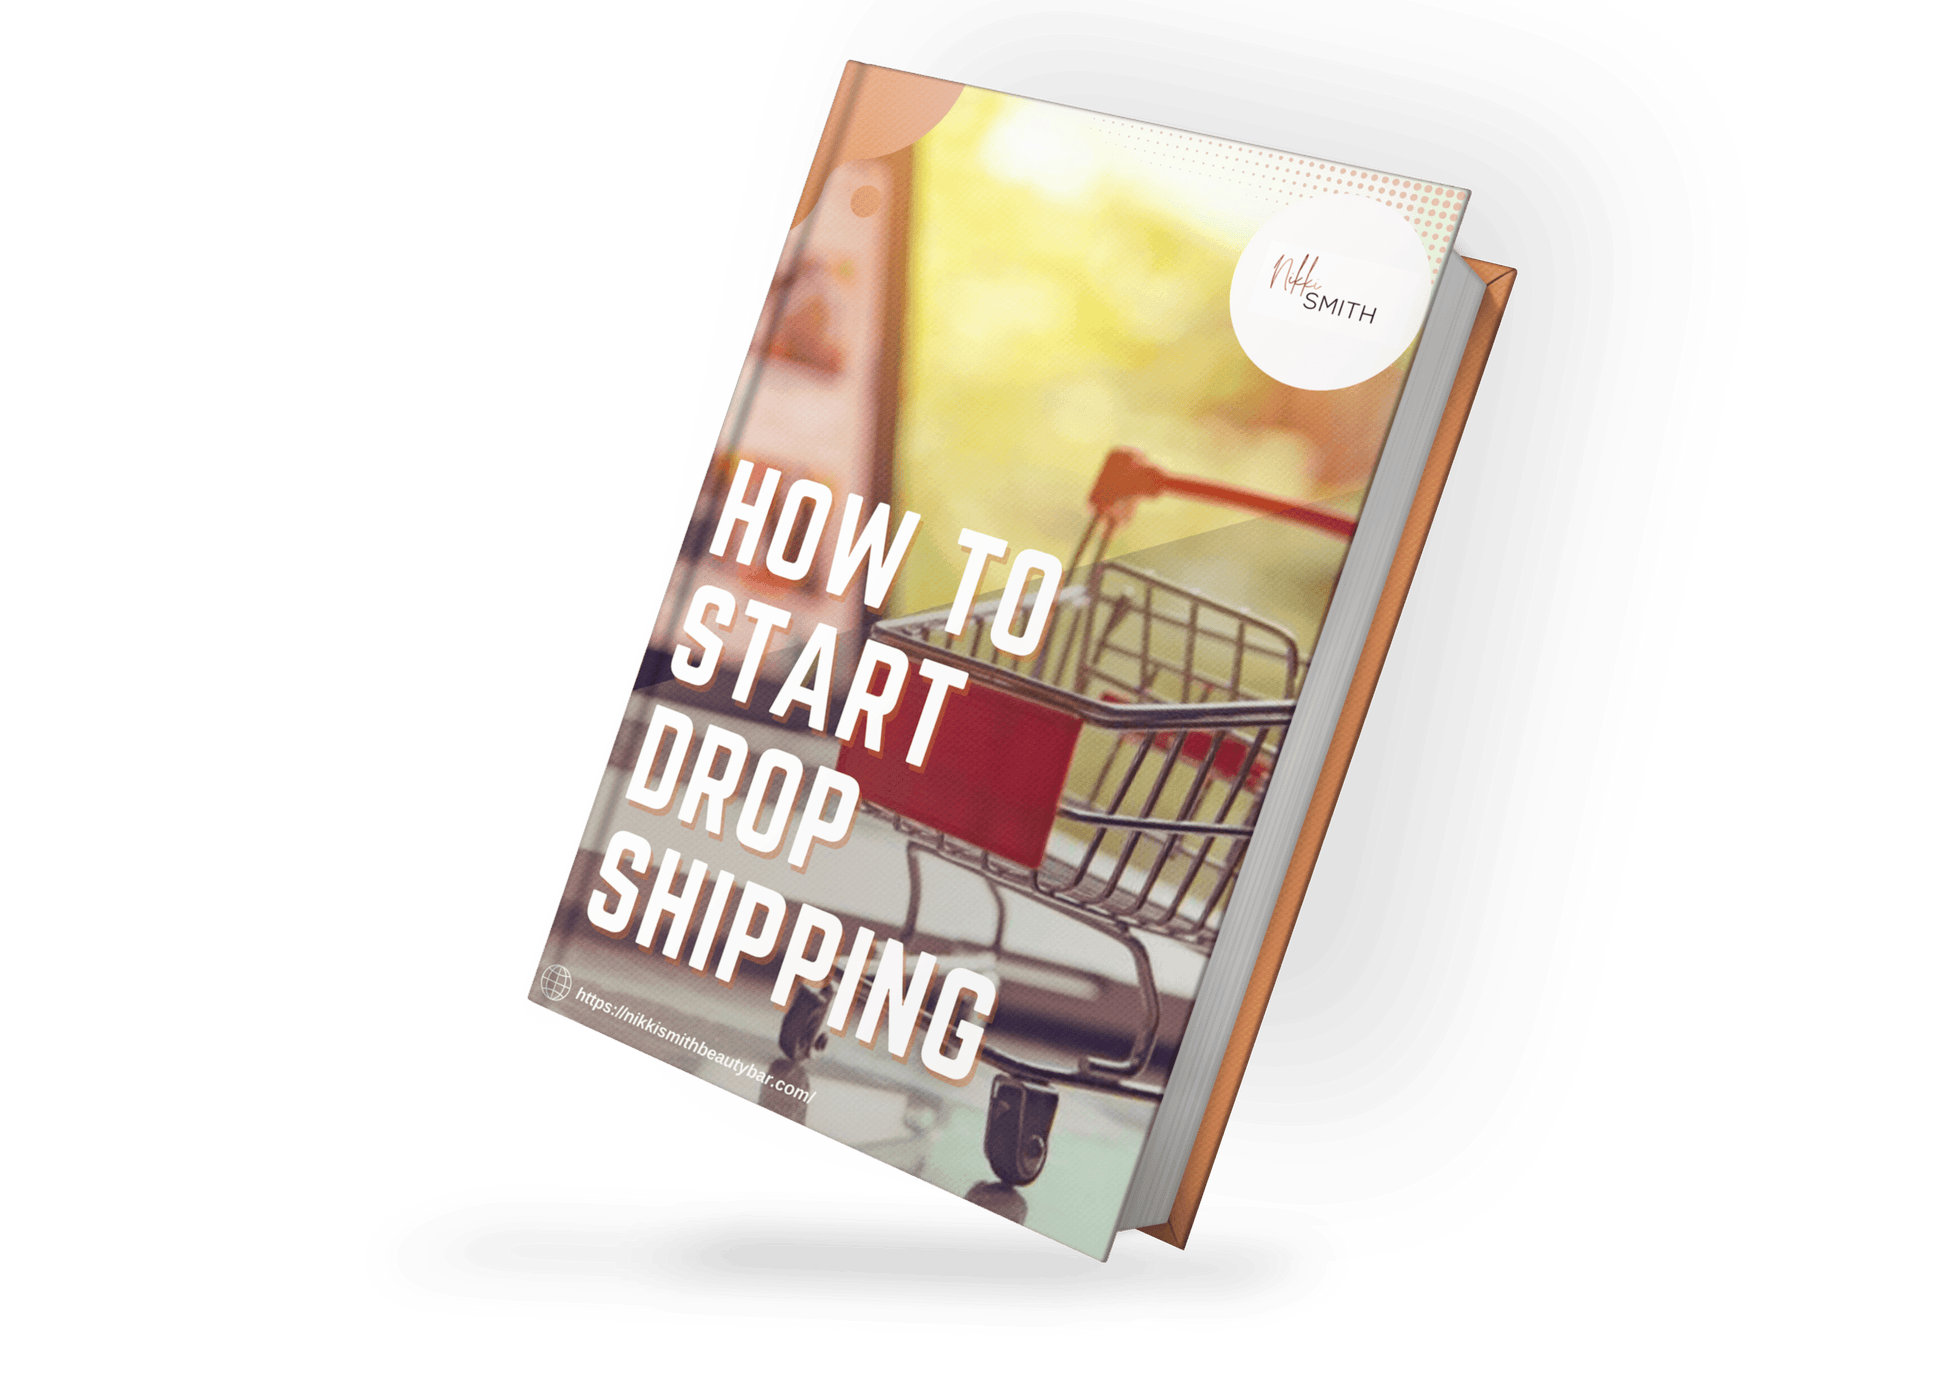 How To Start Drop Shipping - Nikki Smith Collection 